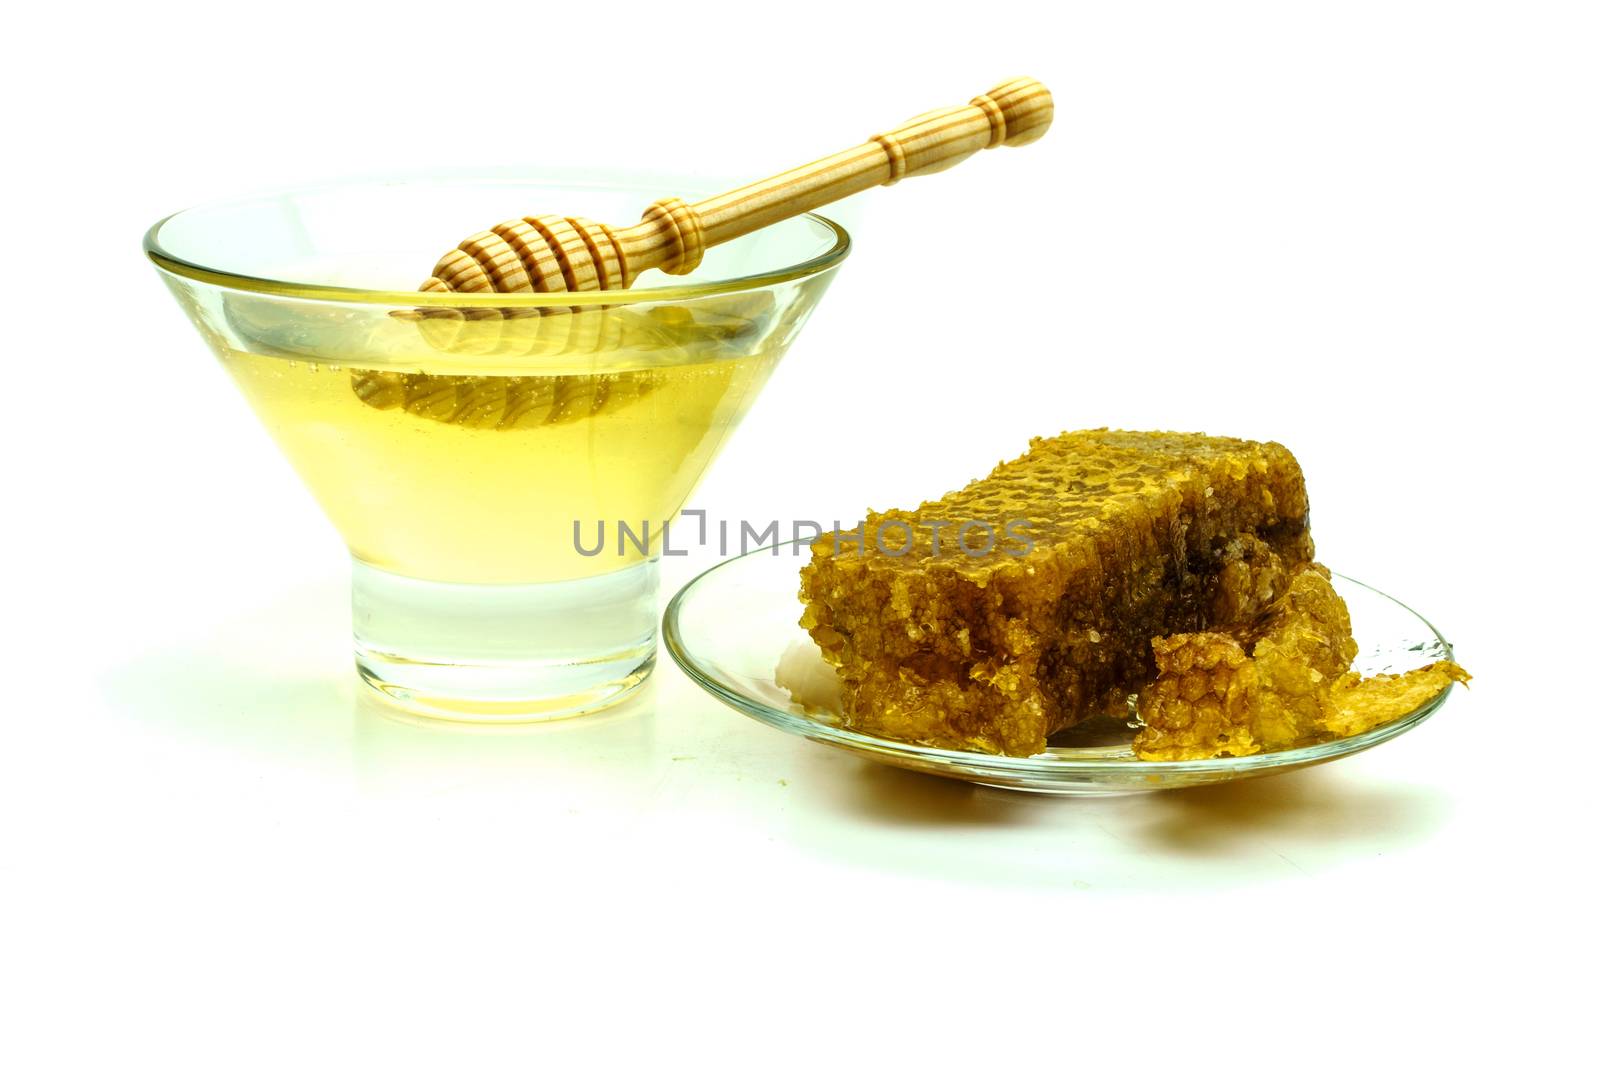 Honey with honeycombs on a glass plate on a white background